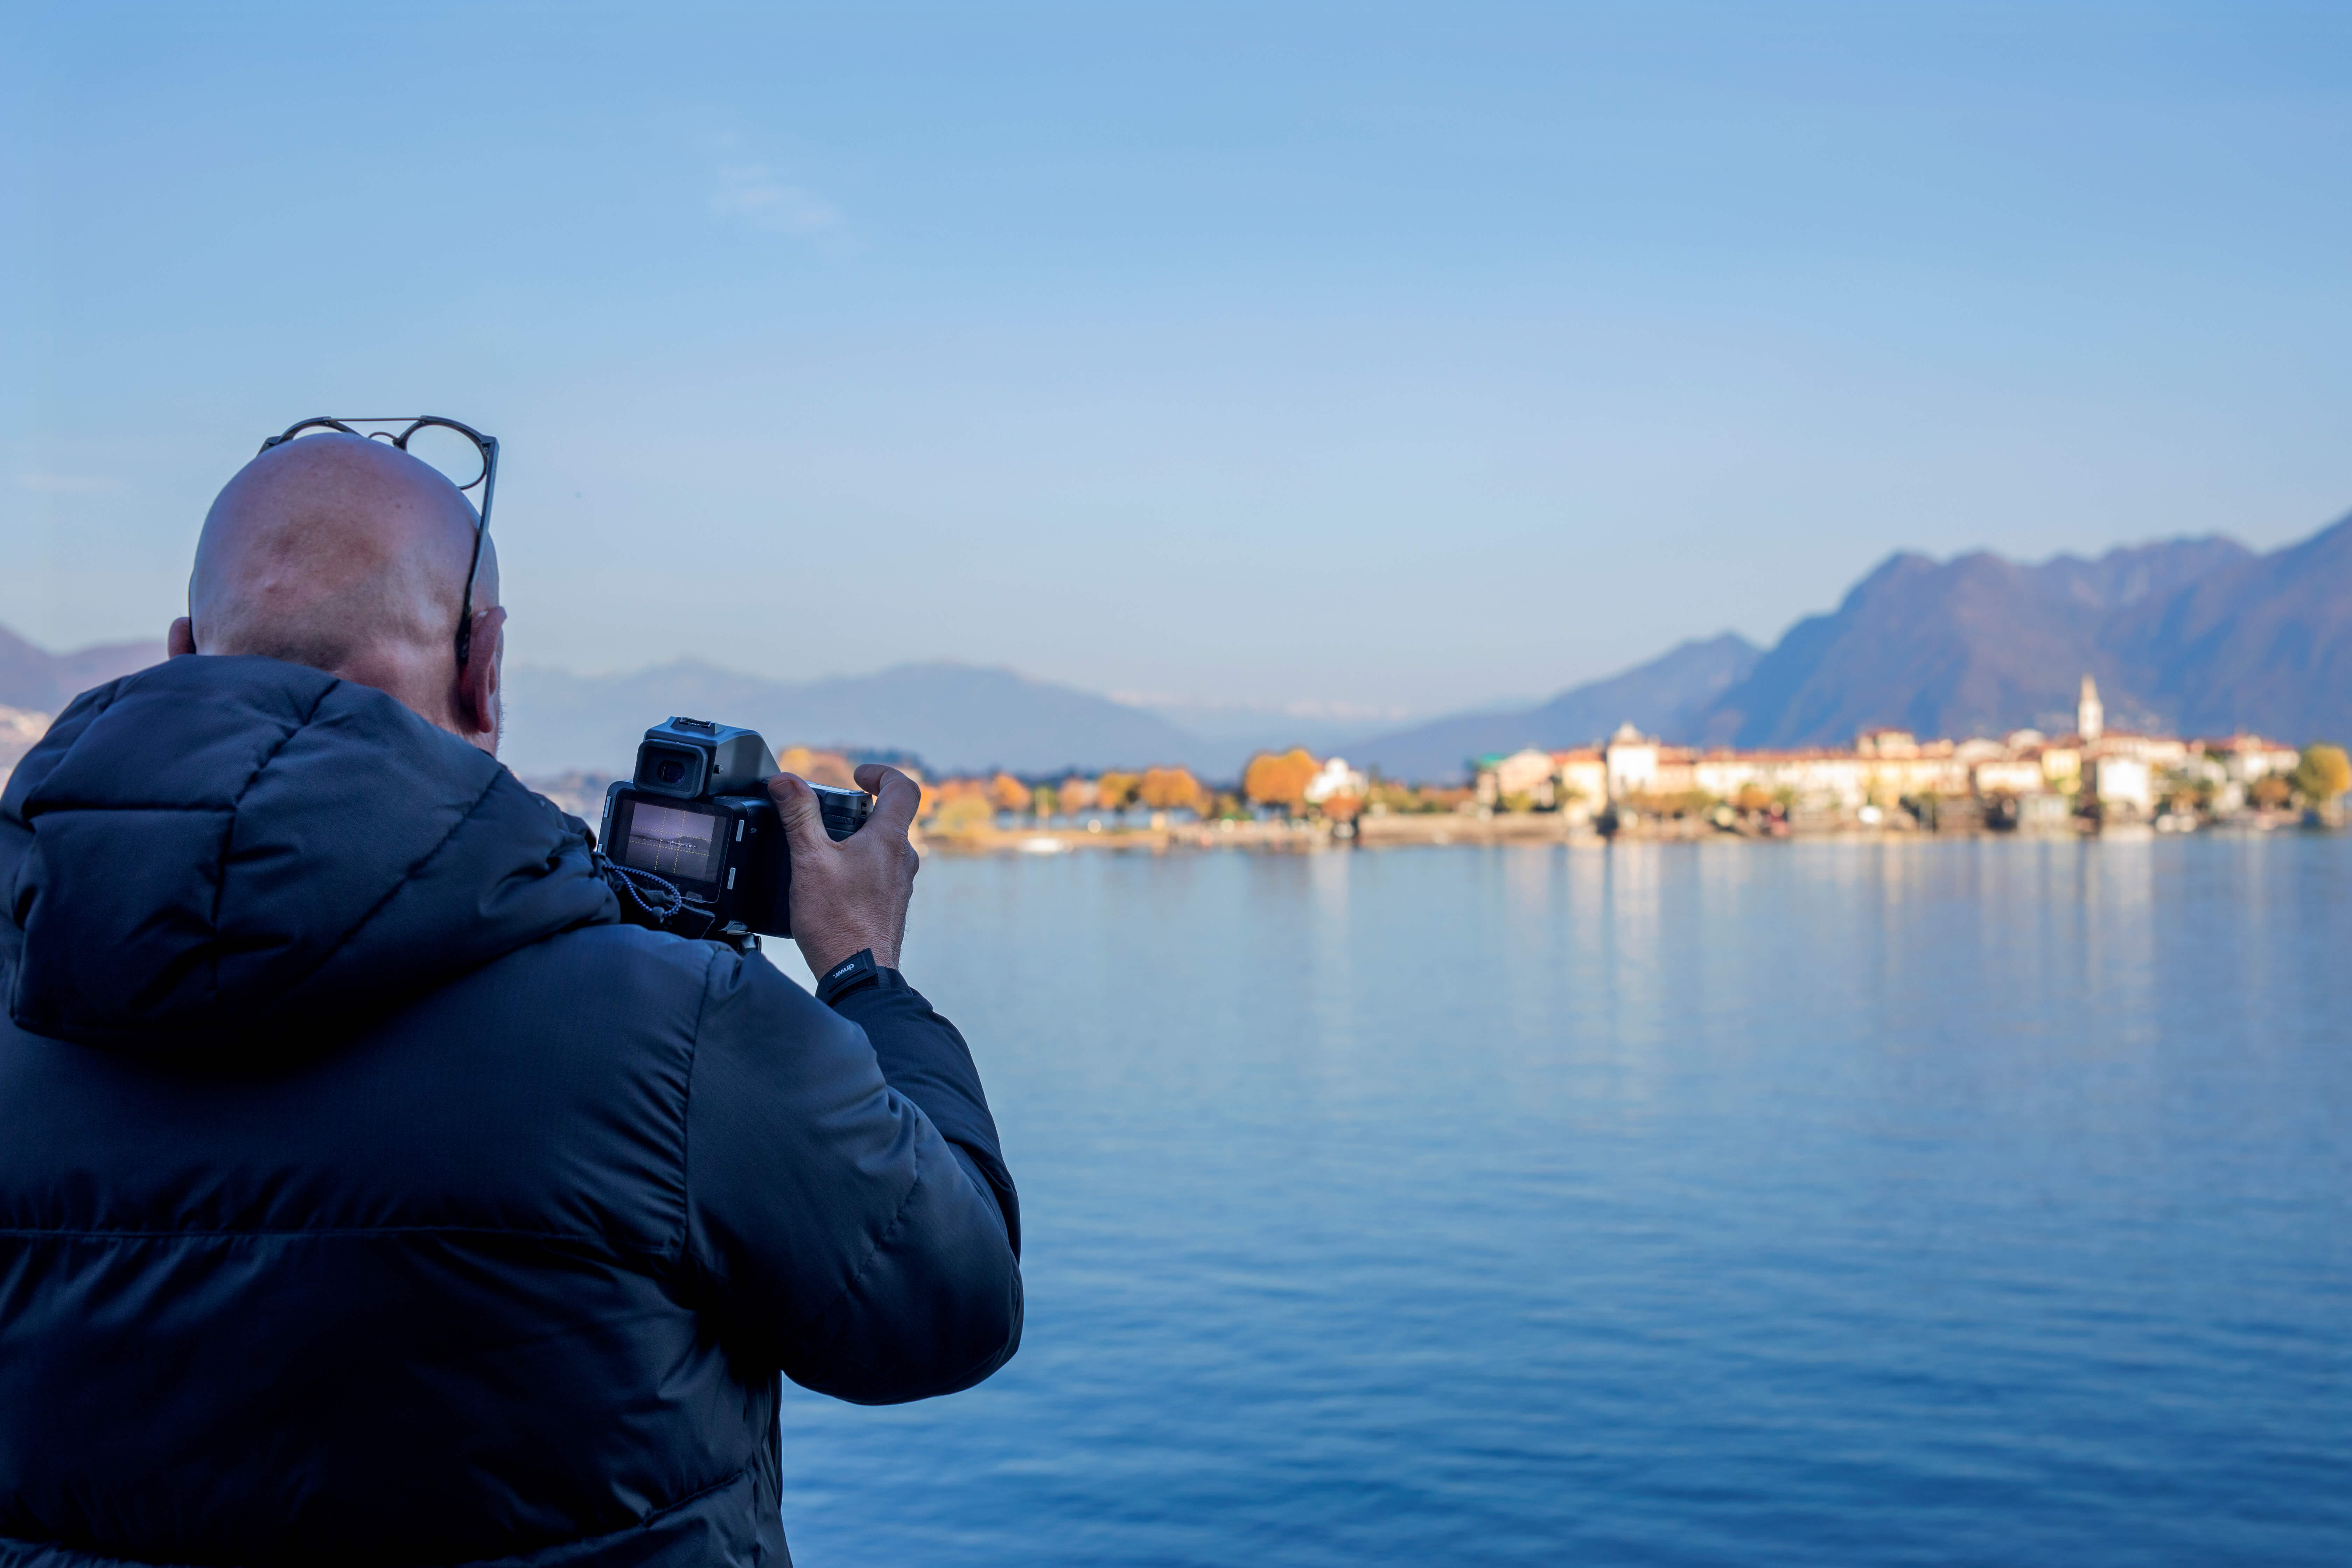 The photographer at Lake Maggiore while capturing a snapshot of his region.